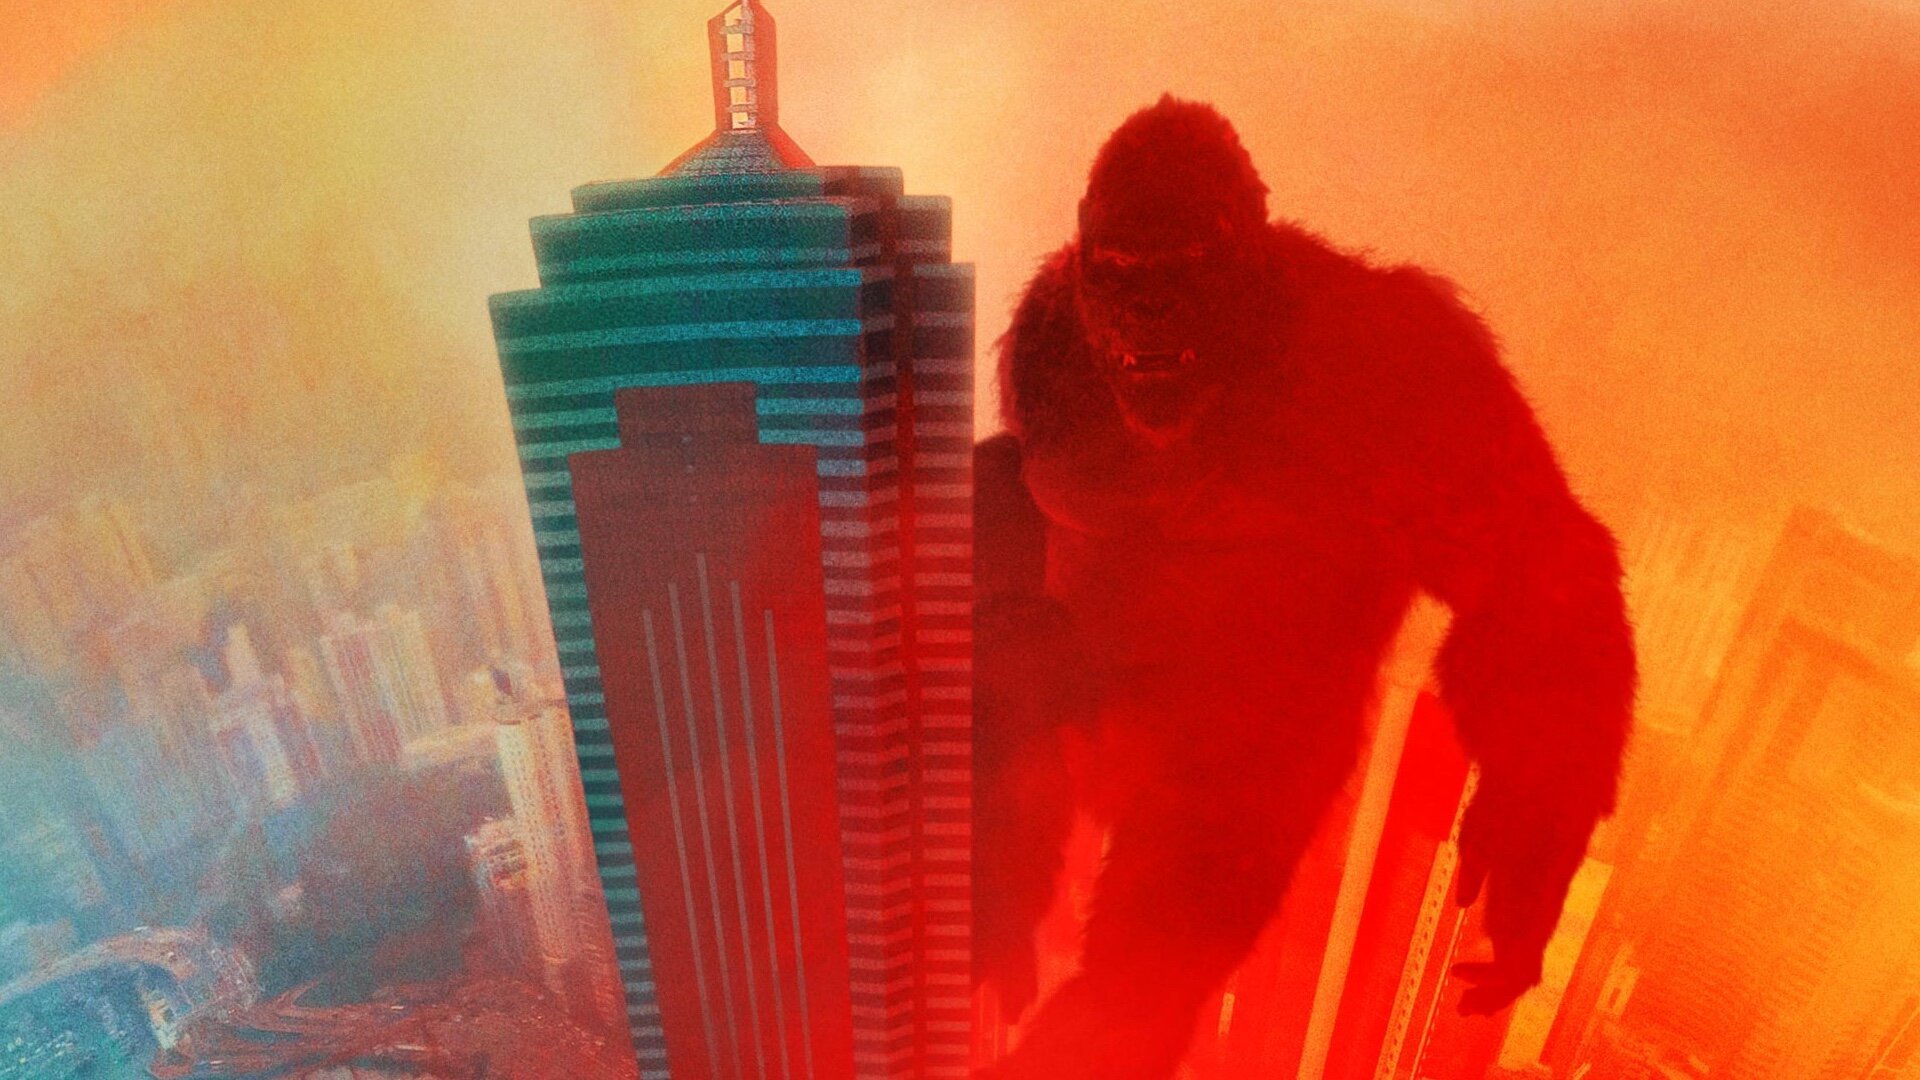 Godzilla x Kong: The New Empire wallpaper Resolution 1920x1080 | Best Download this awesome wallpaper - Cool Wallpaper HD - CoolWallpaper-HD.com